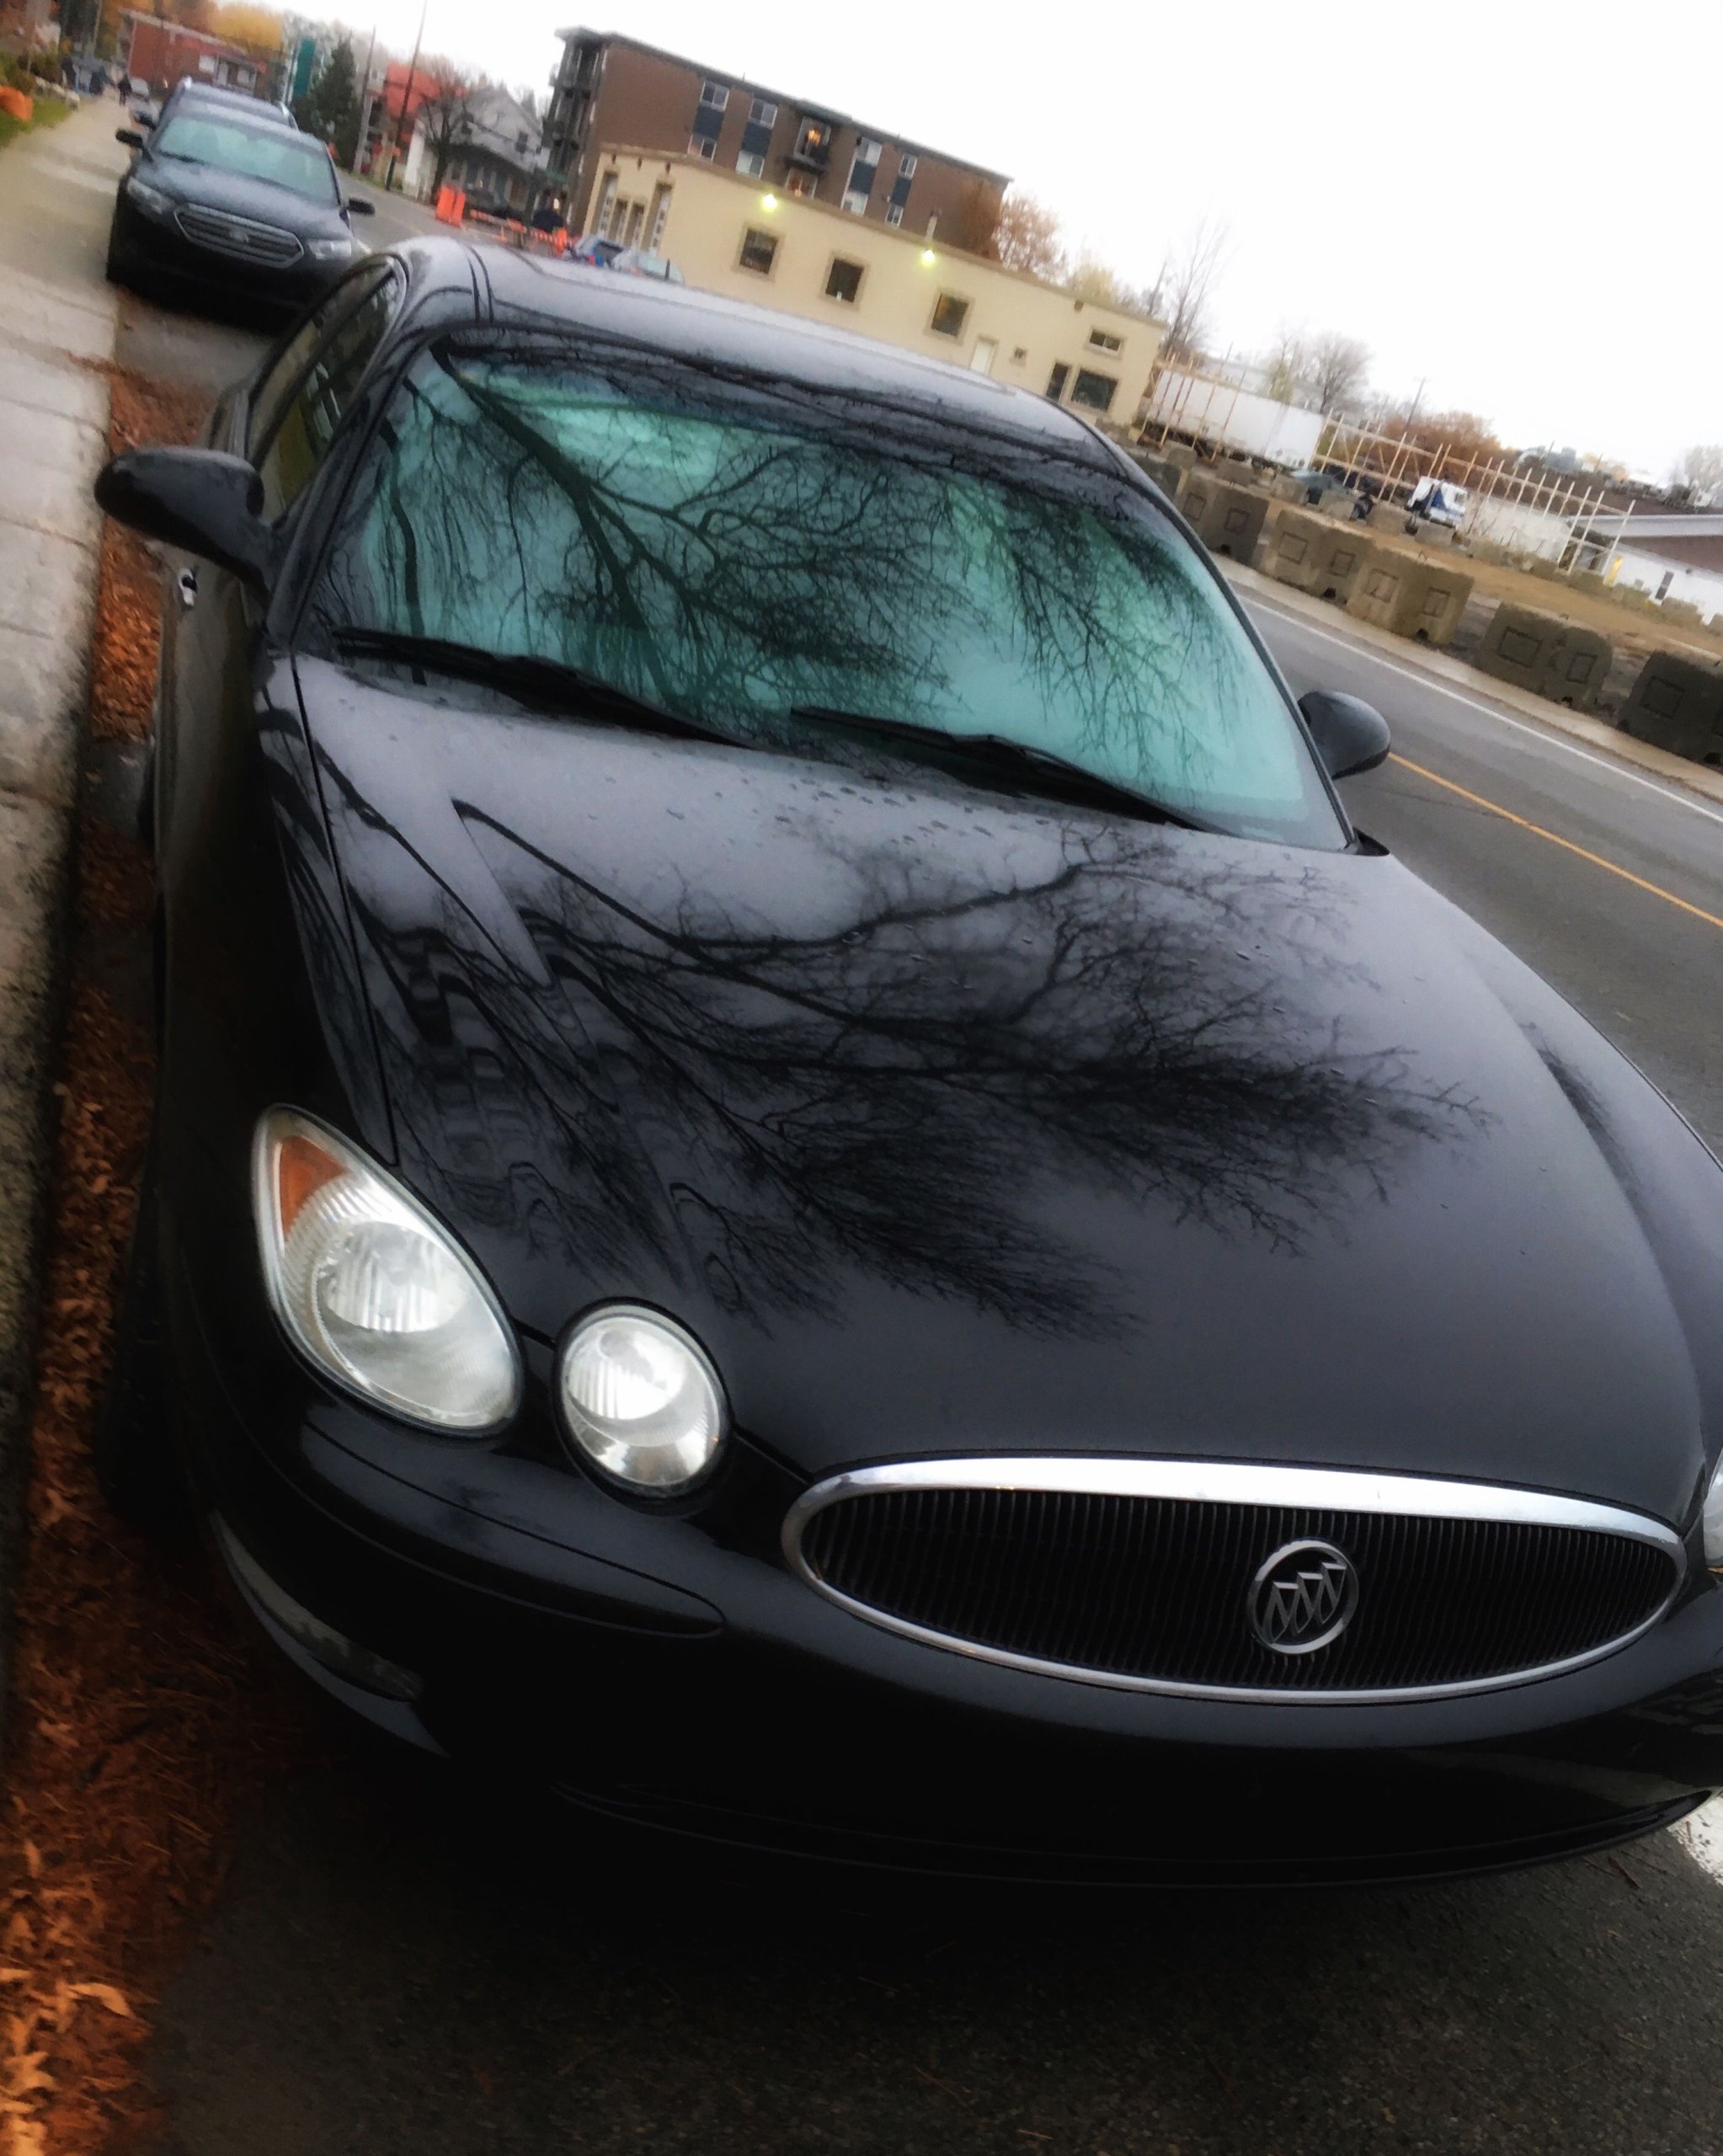 2005 Black Buick LaCrosse parked at the side of the road